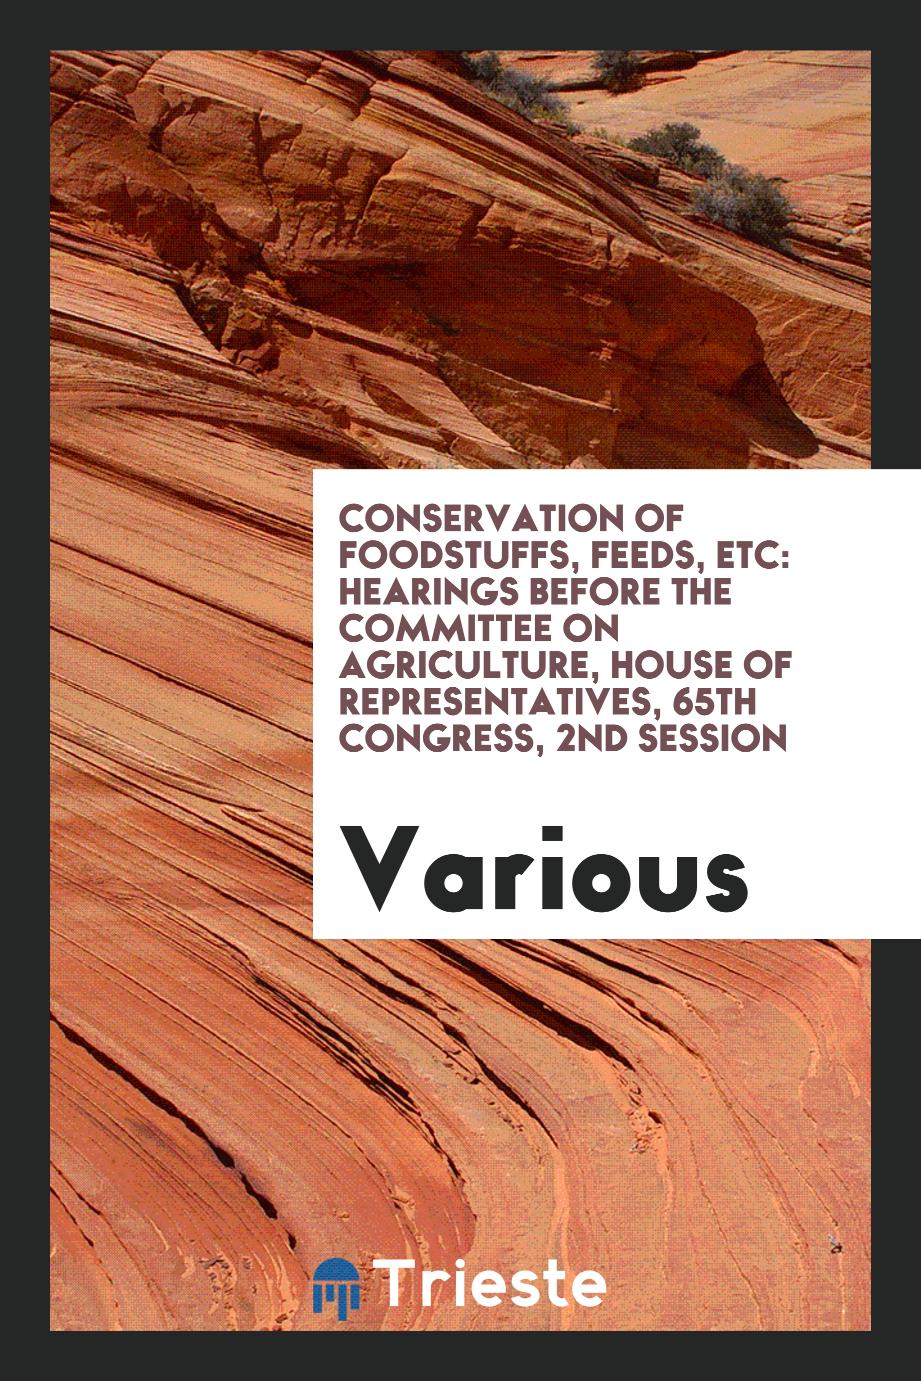 Conservation of Foodstuffs, Feeds, Etc: Hearings Before the Committee On Agriculture, House of Representatives, 65th Congress, 2nd Session